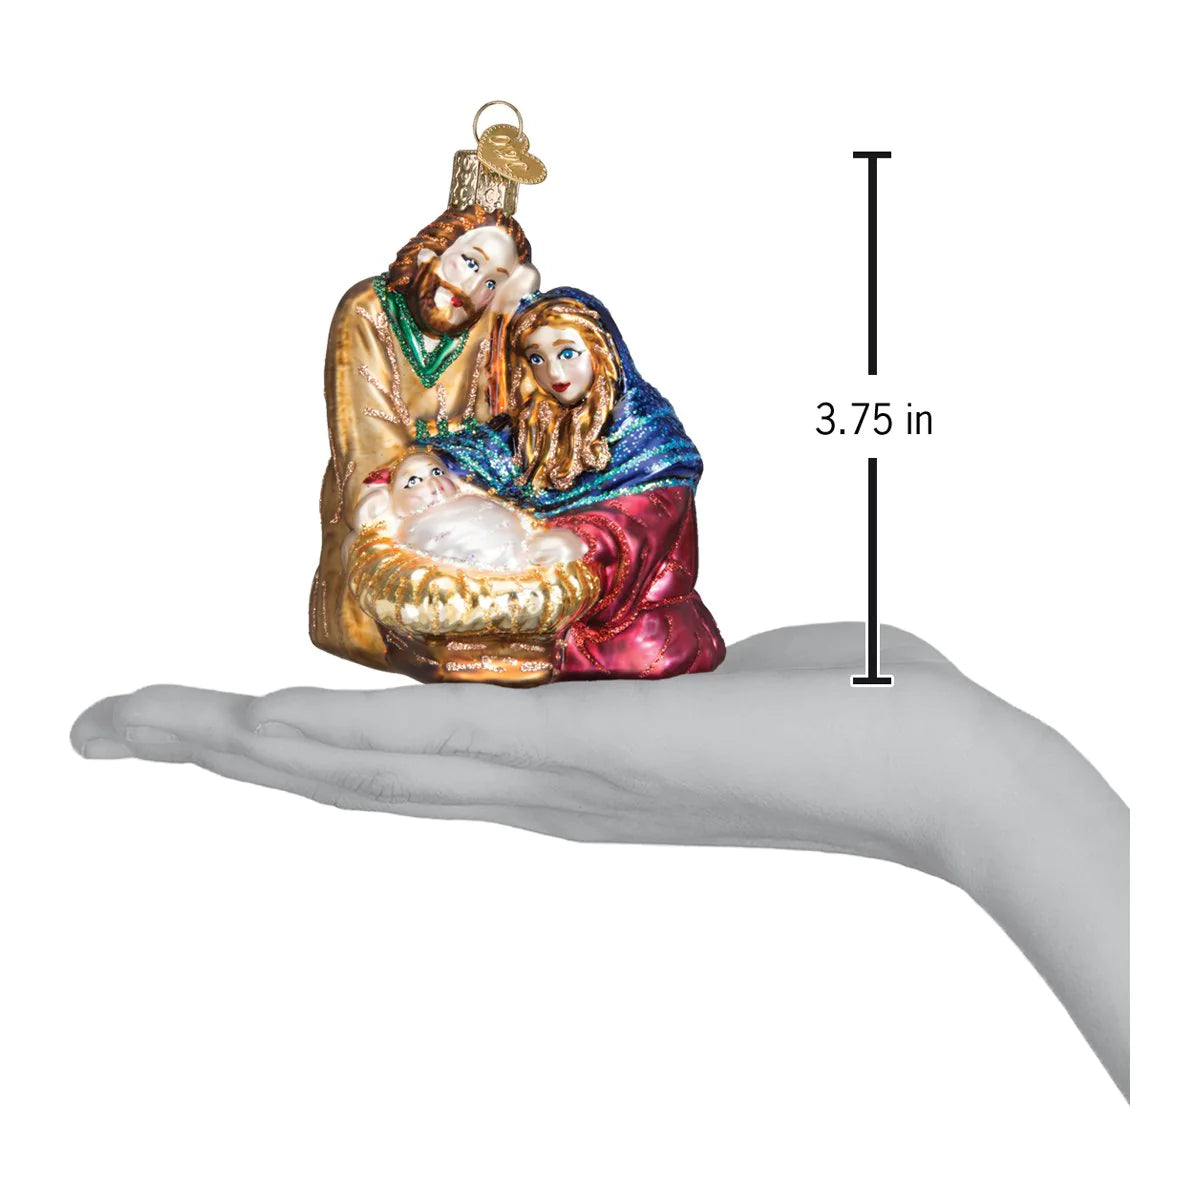 Old World Christmas Holy Family glass ornament Mary, Joseph and Baby Jesus in a manger dimensions 